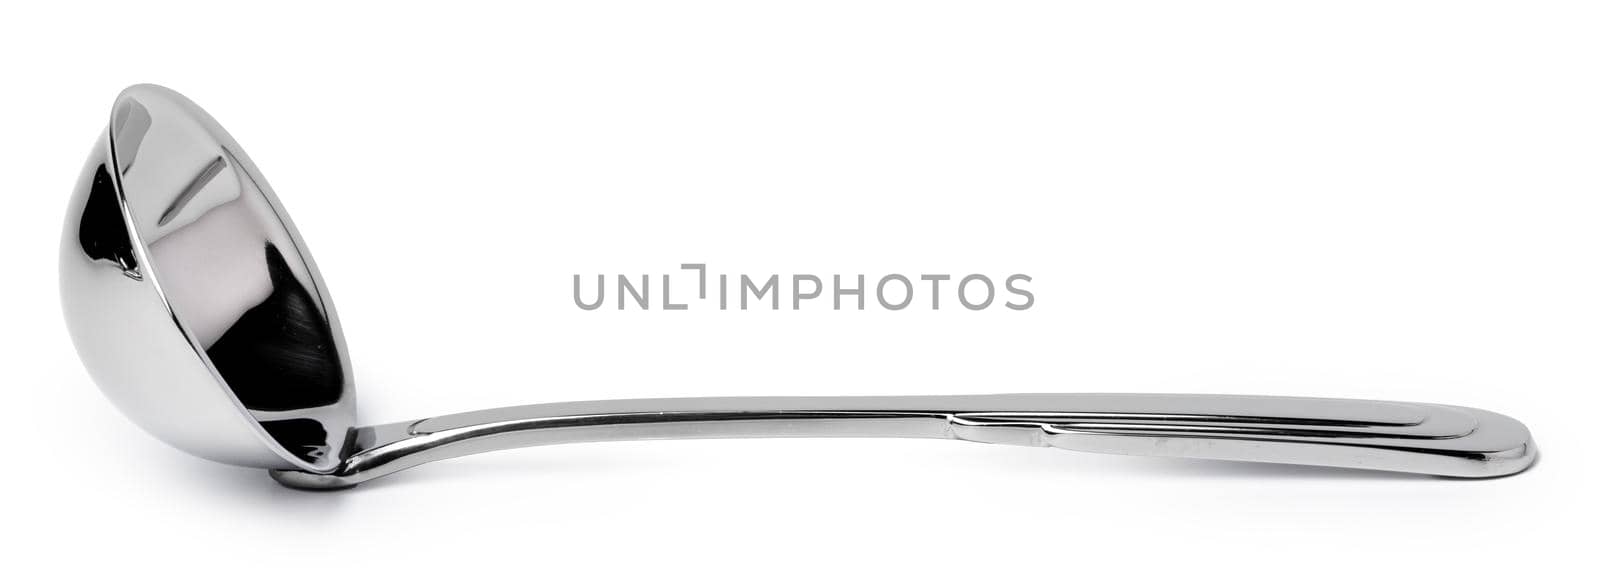 Steel soup ladle isolated on white background close up